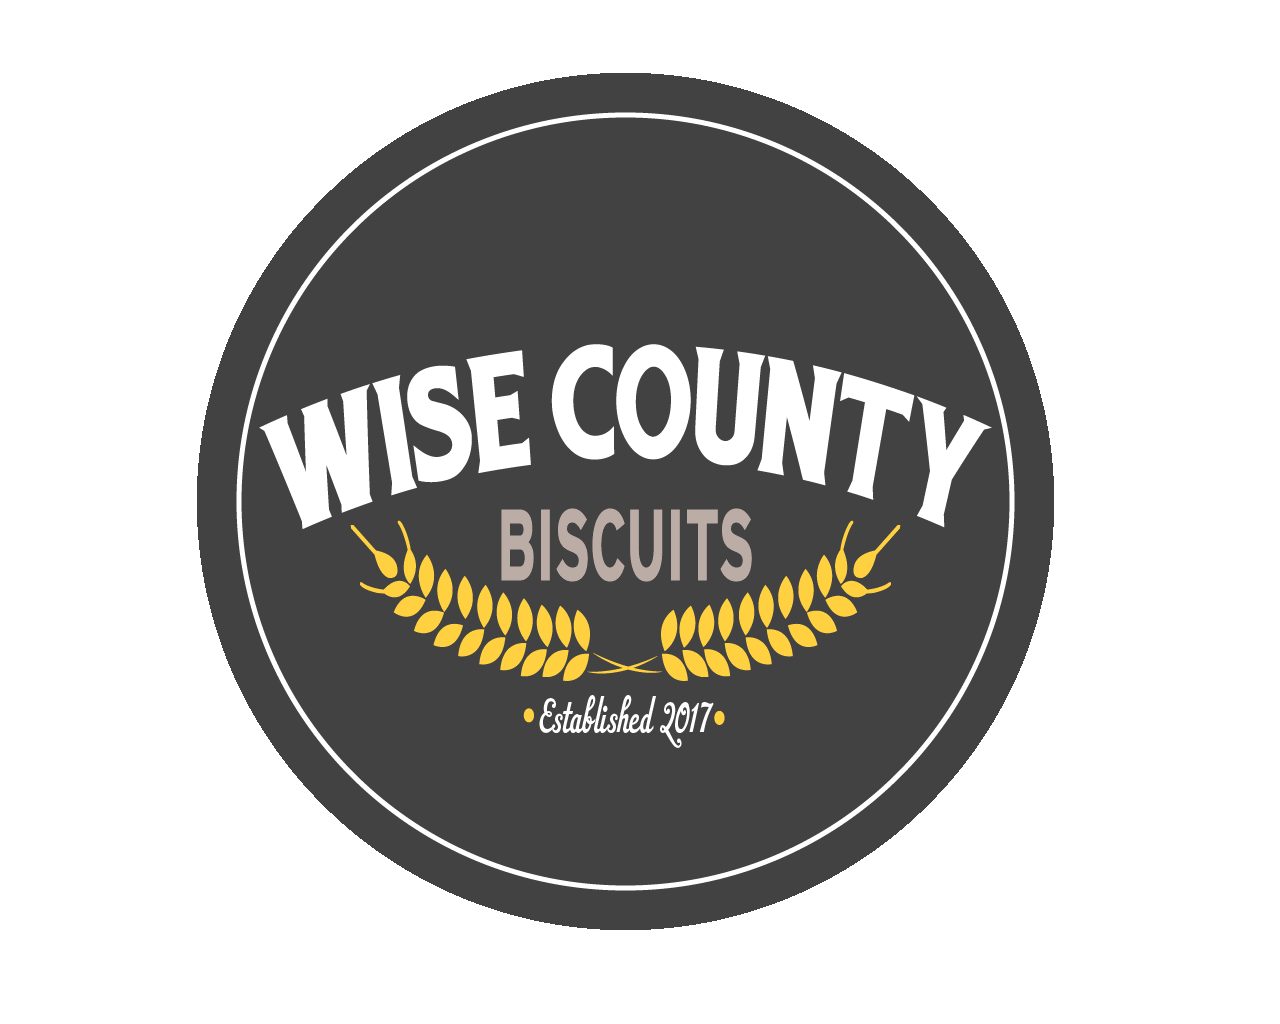 Wise County Biscuits